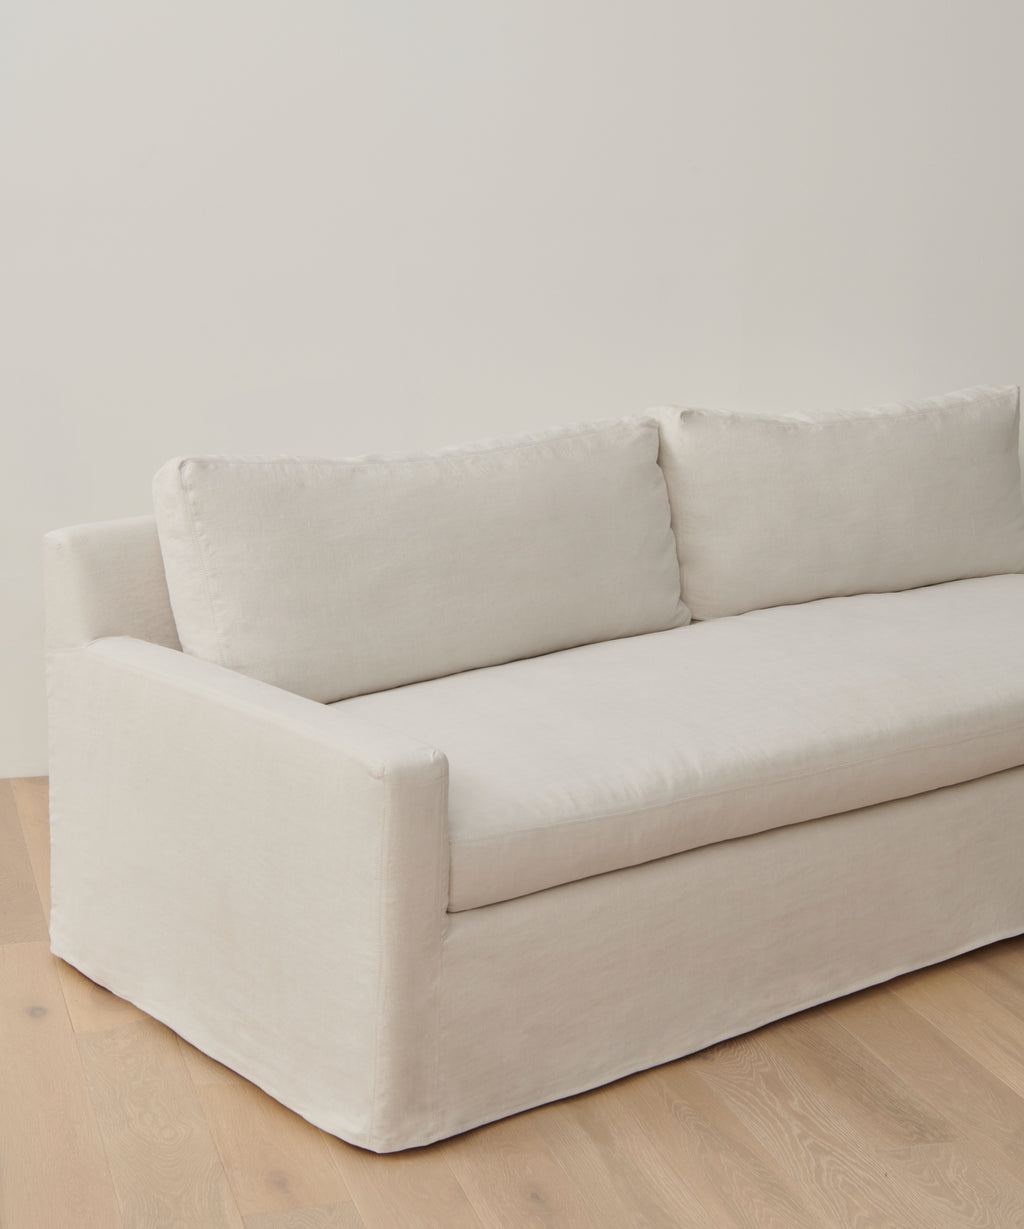 Wool Seat and Back Couch Cushions / All-natural, Free of